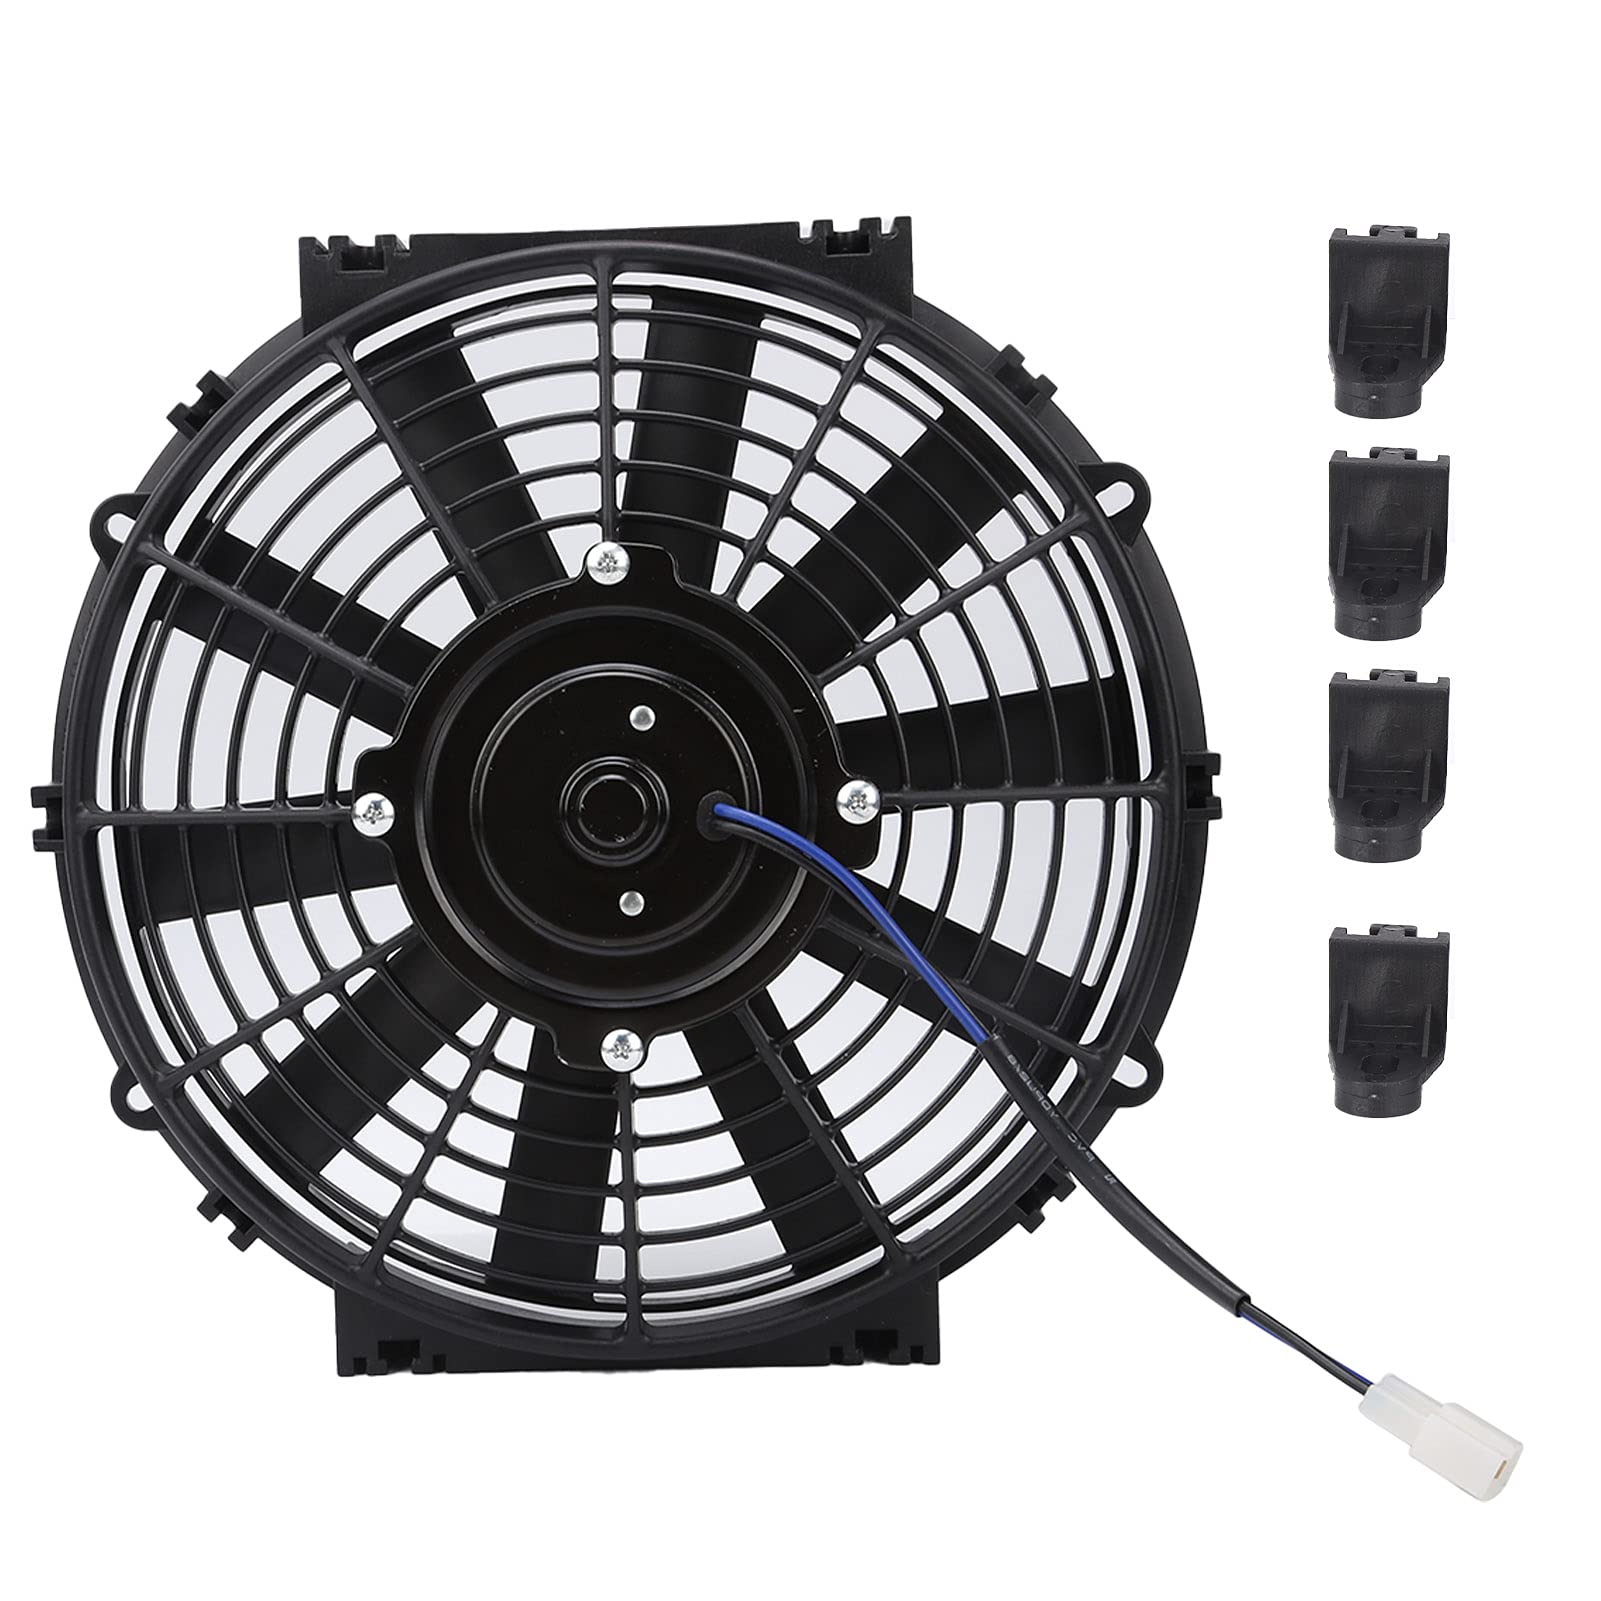 Unversal Black Cooling Fan, 10in Slim Electric Cooling Fan Radiator, 24V 80W 2100RPM 10 Straight Blades For Car von Ymiko